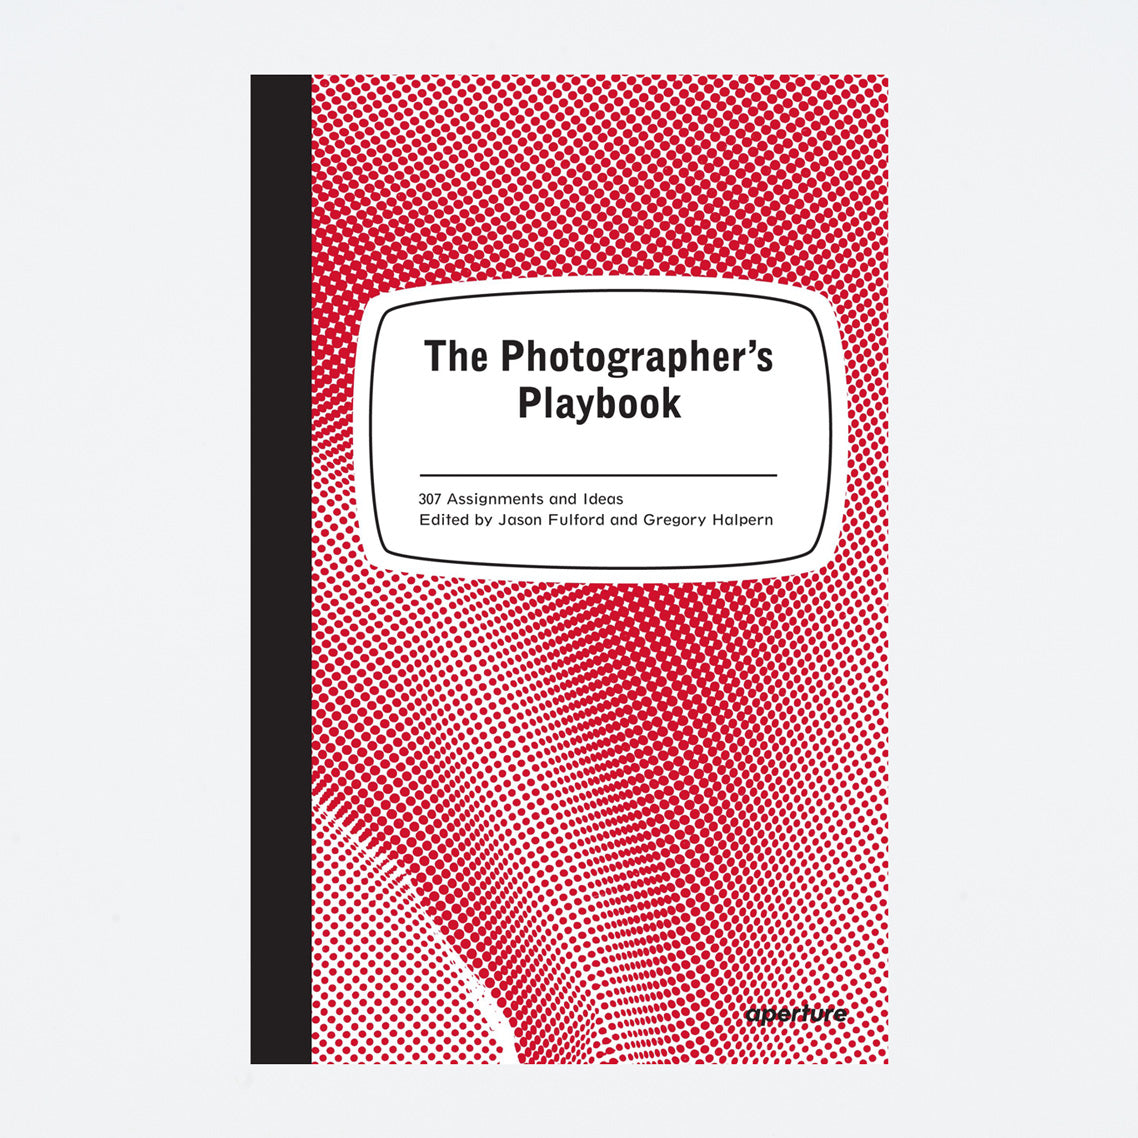 The Photographer's Playbook